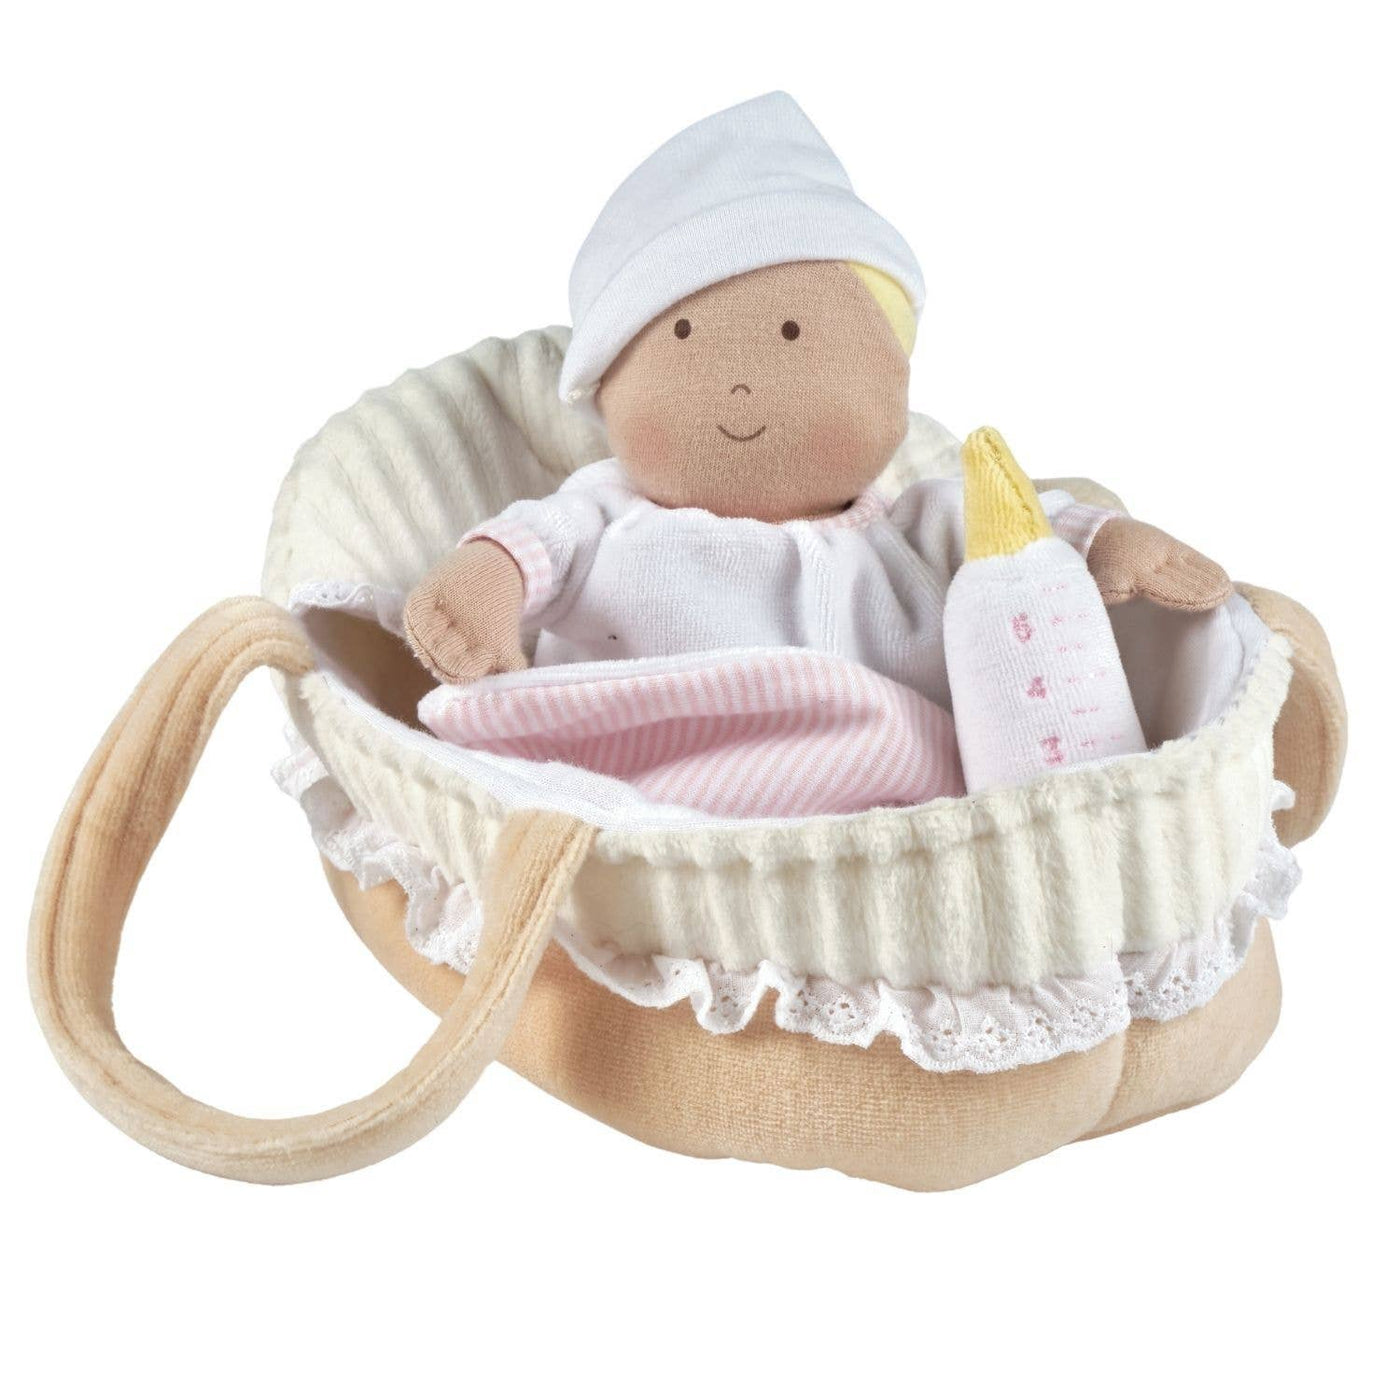 Tikiri Toys LLC Carry Cot with Baby Grace, Bottle & Blanket - Simple Good